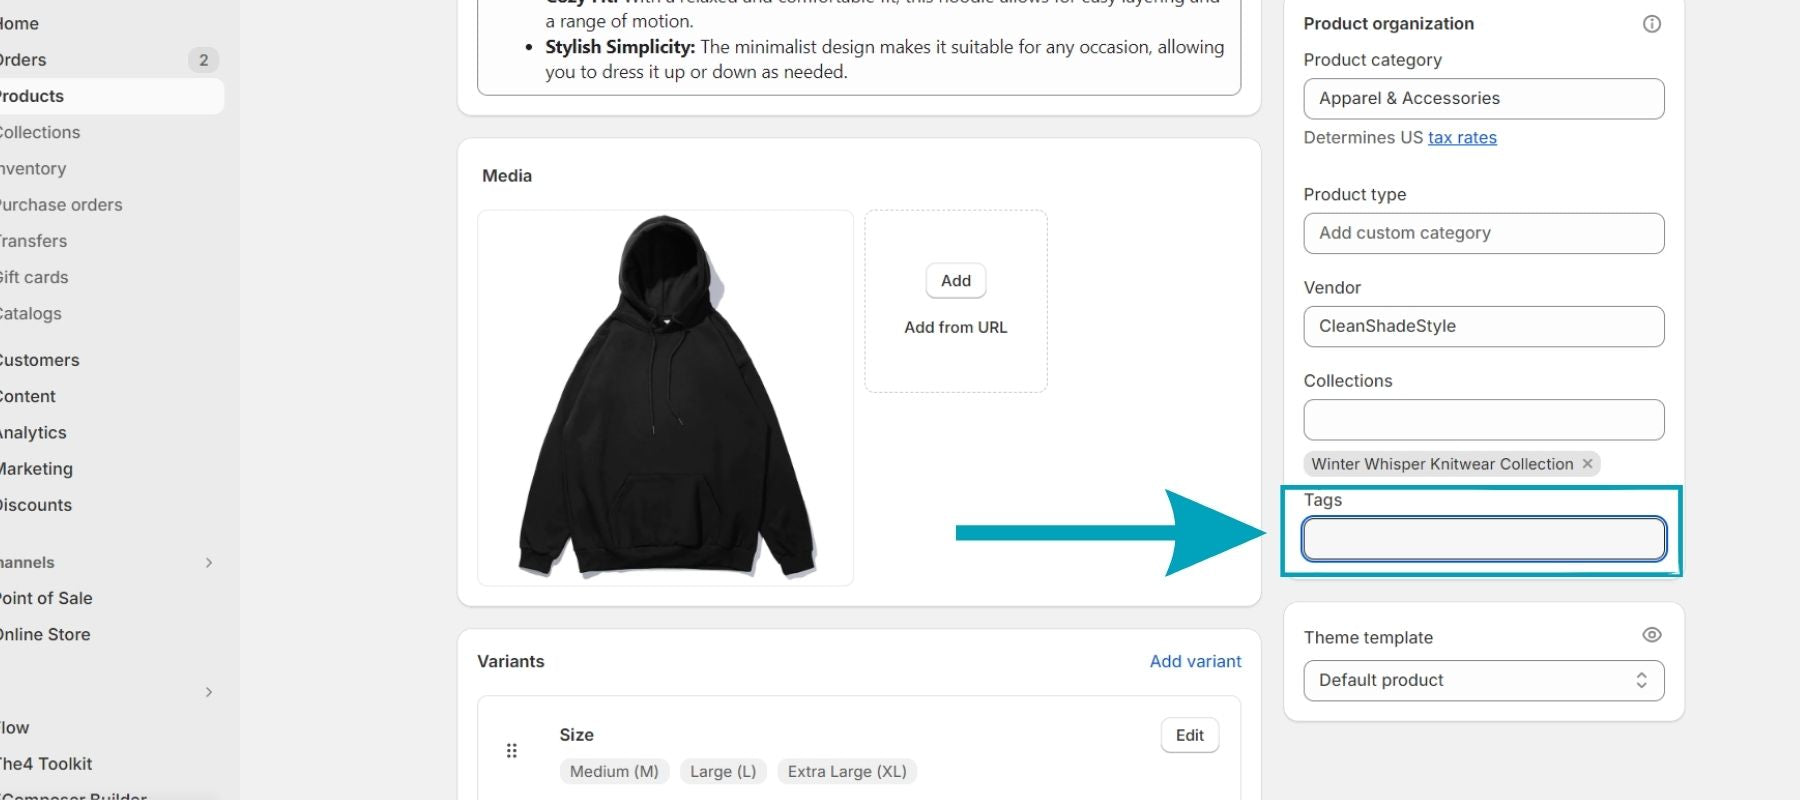 Review Product Tagging And Categorization